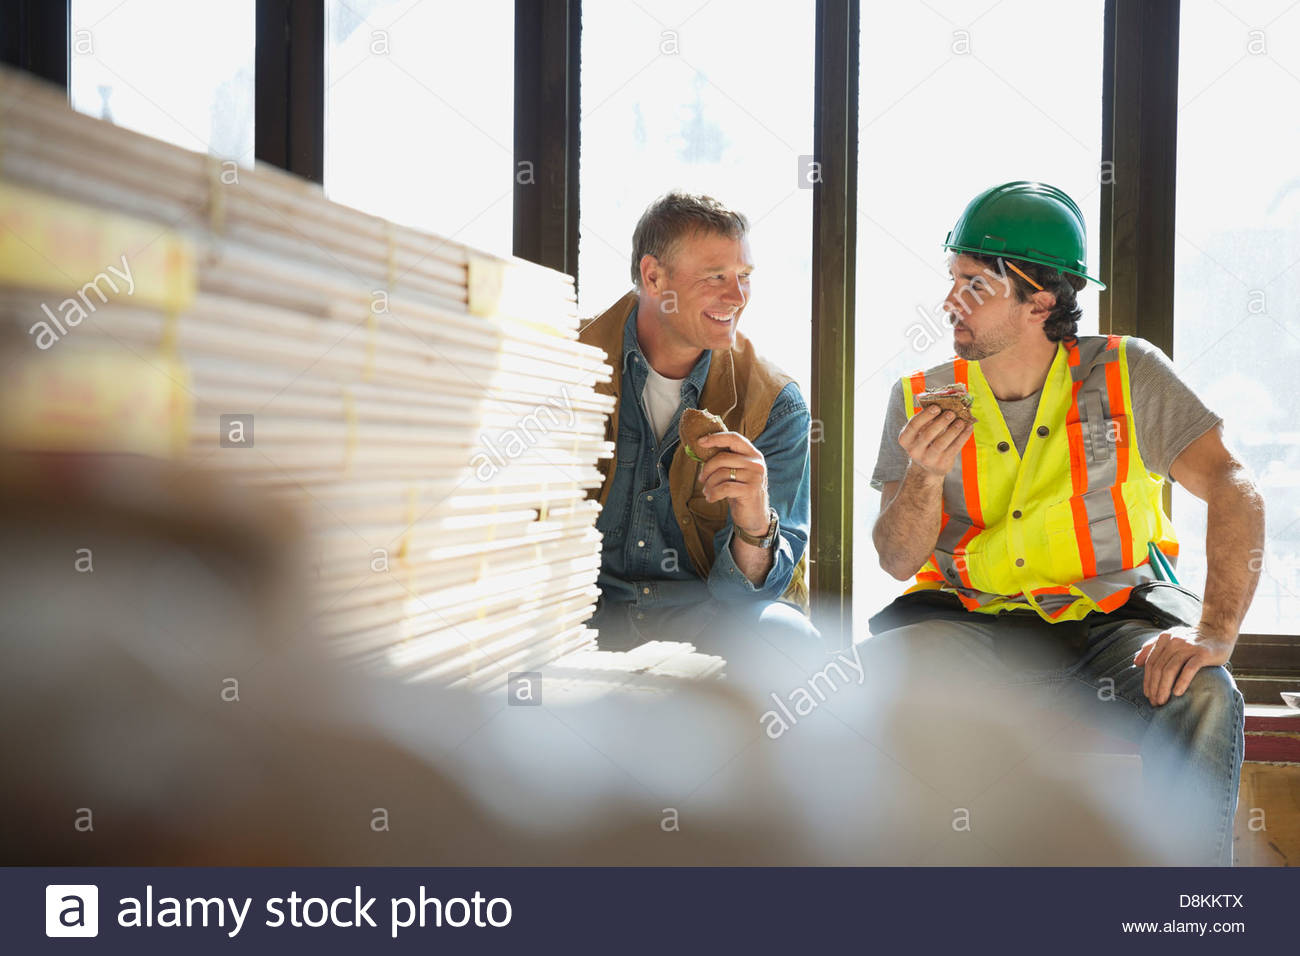 Tradesman and foreman taking lunch break at construction site Stock Photo